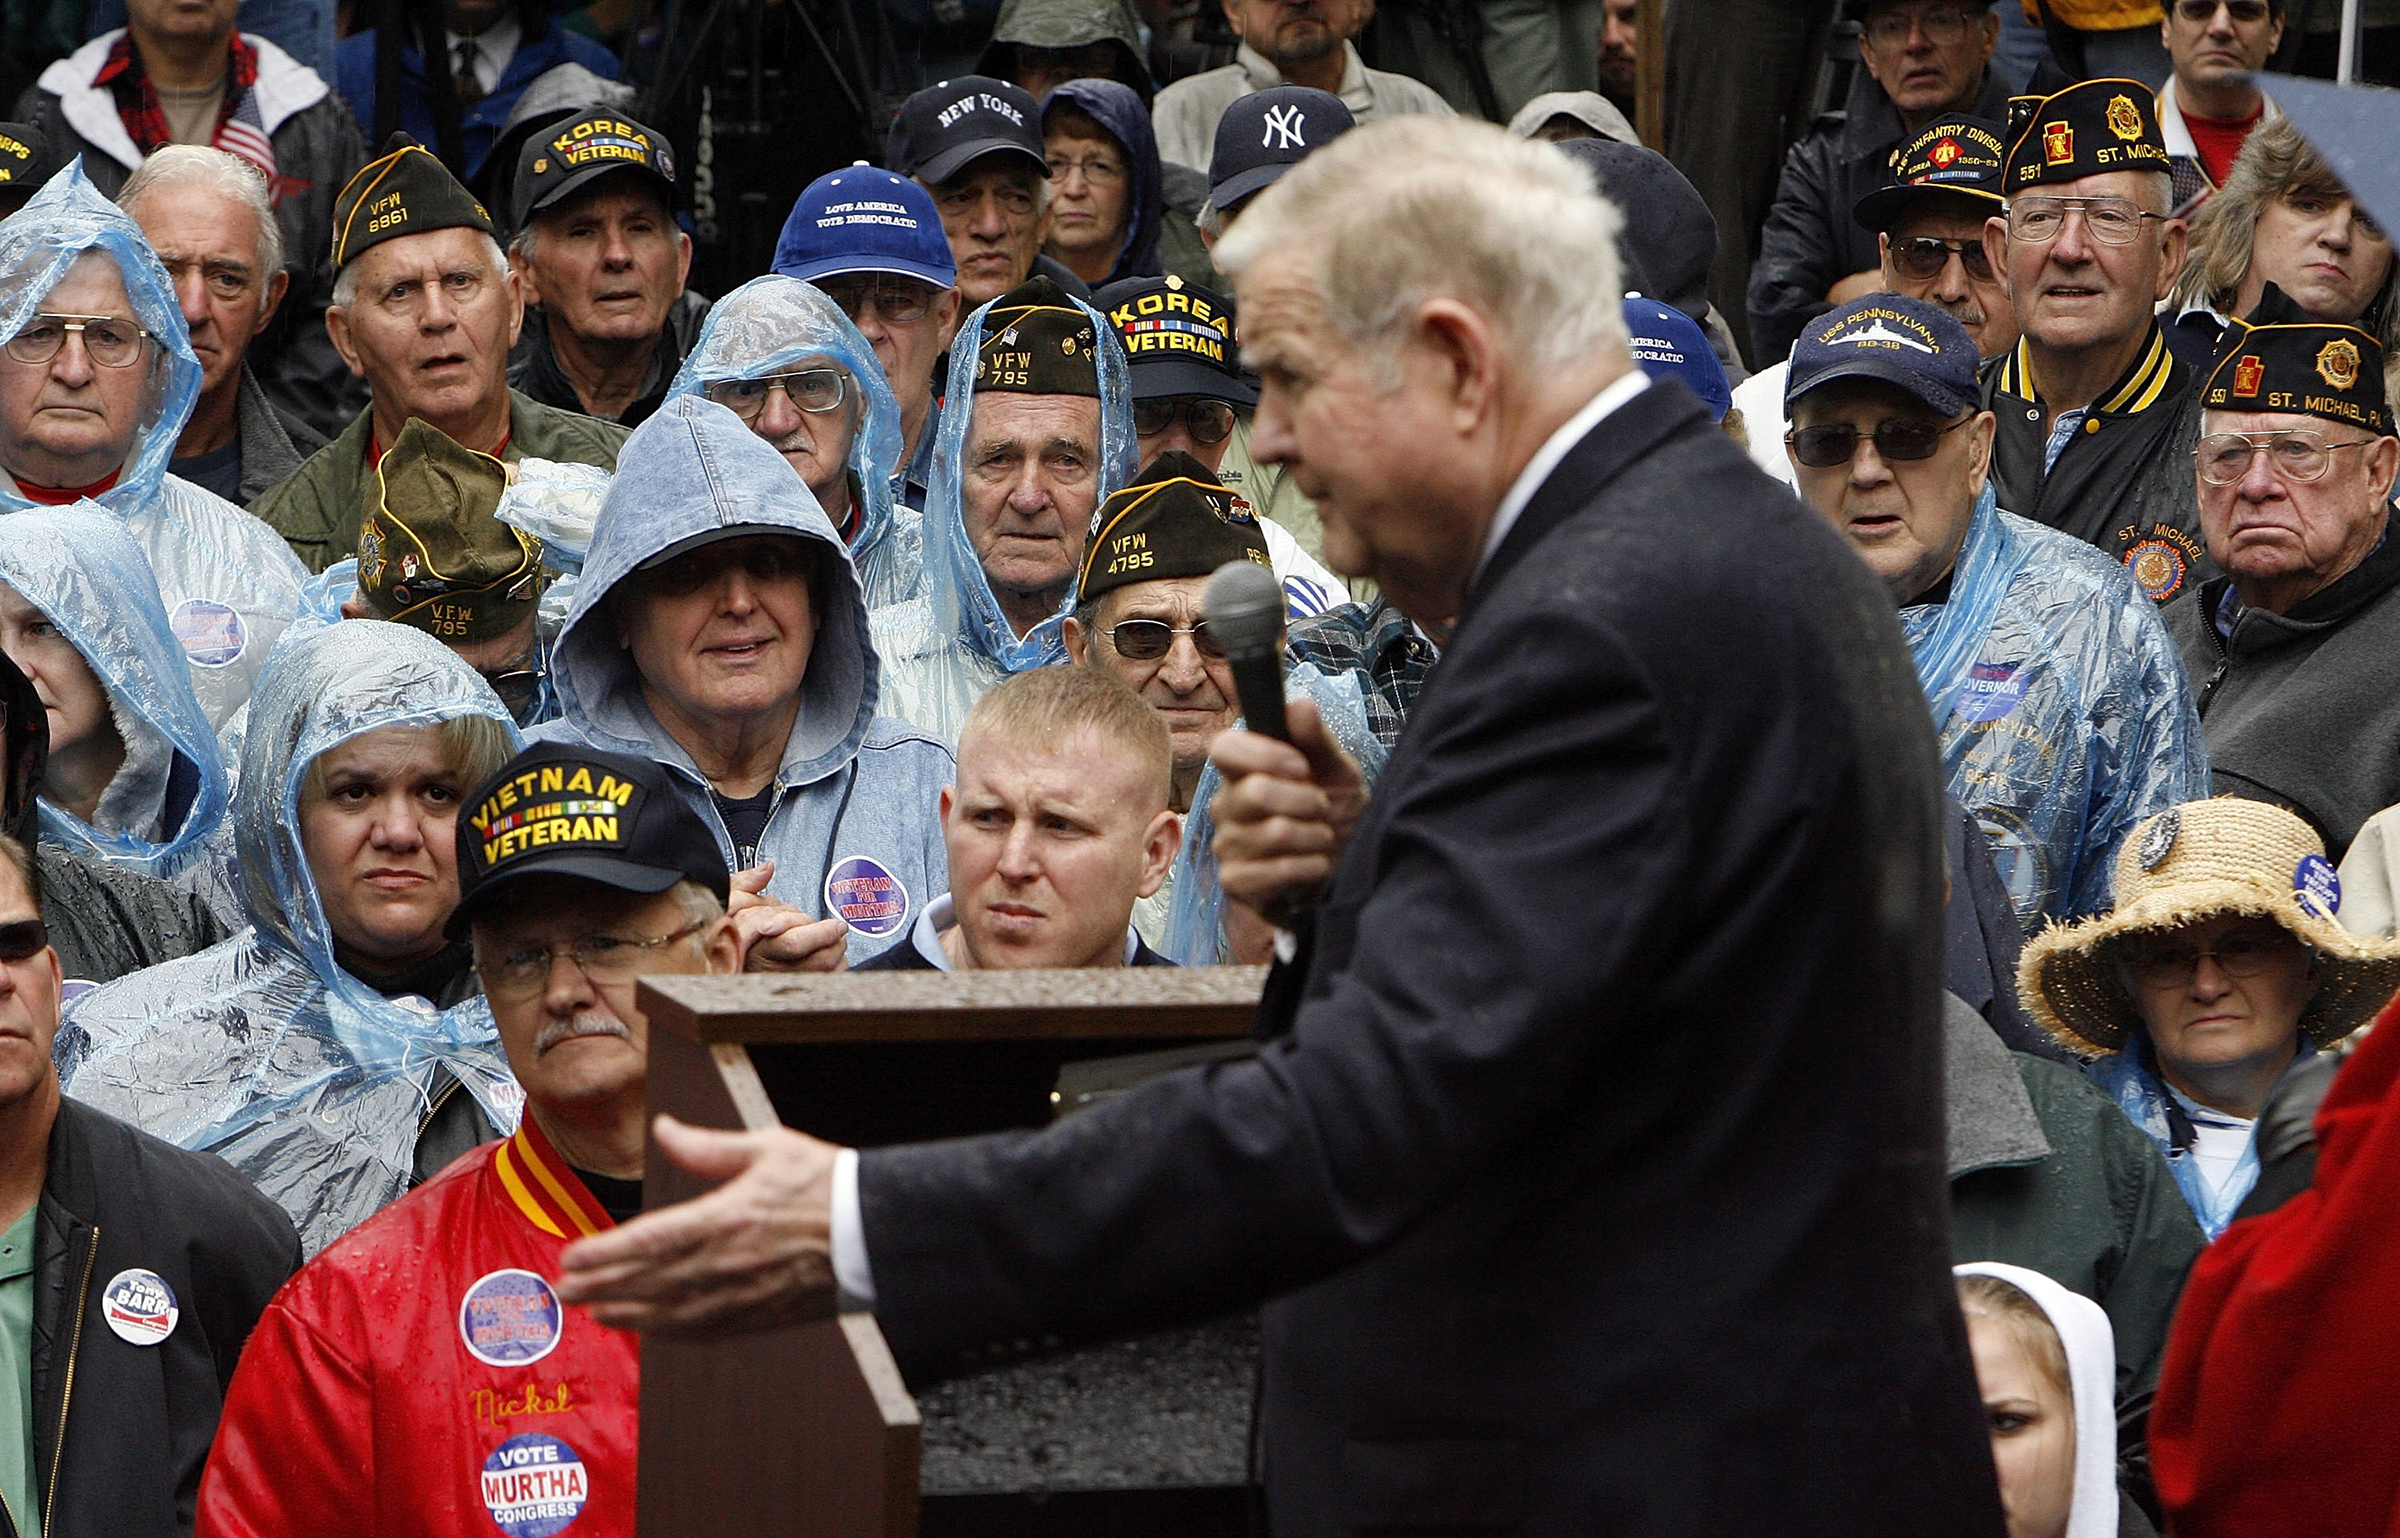 All eyes are on Rep. John Murtha (D-PA) as he addresses voters and veterans during a campaign rally in Johnstown, Pa., on Sept. 30, 2006. Murtha was the first Vietnam combat veteran elected to Congress in 1974. (Chip Somodevilla—Getty Images)